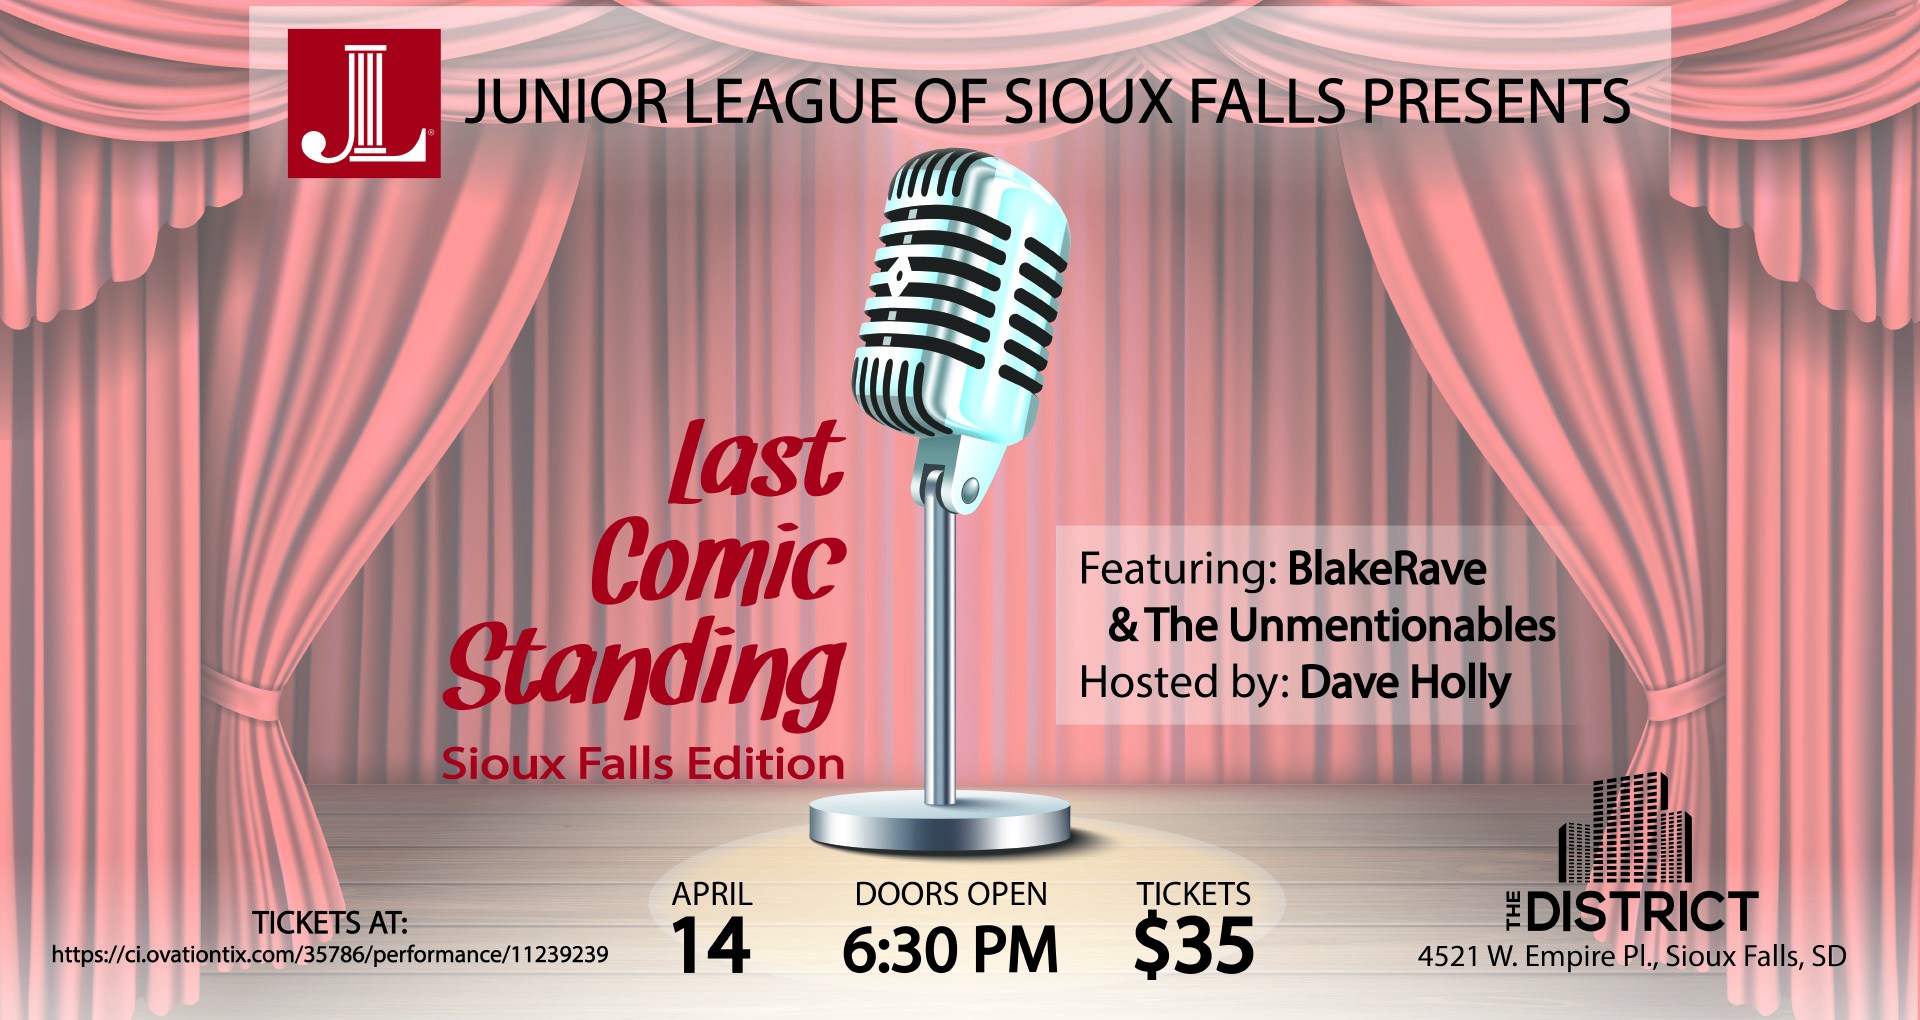 Last Comic Standing Sioux Falls Edition Sioux Falls Arts Council